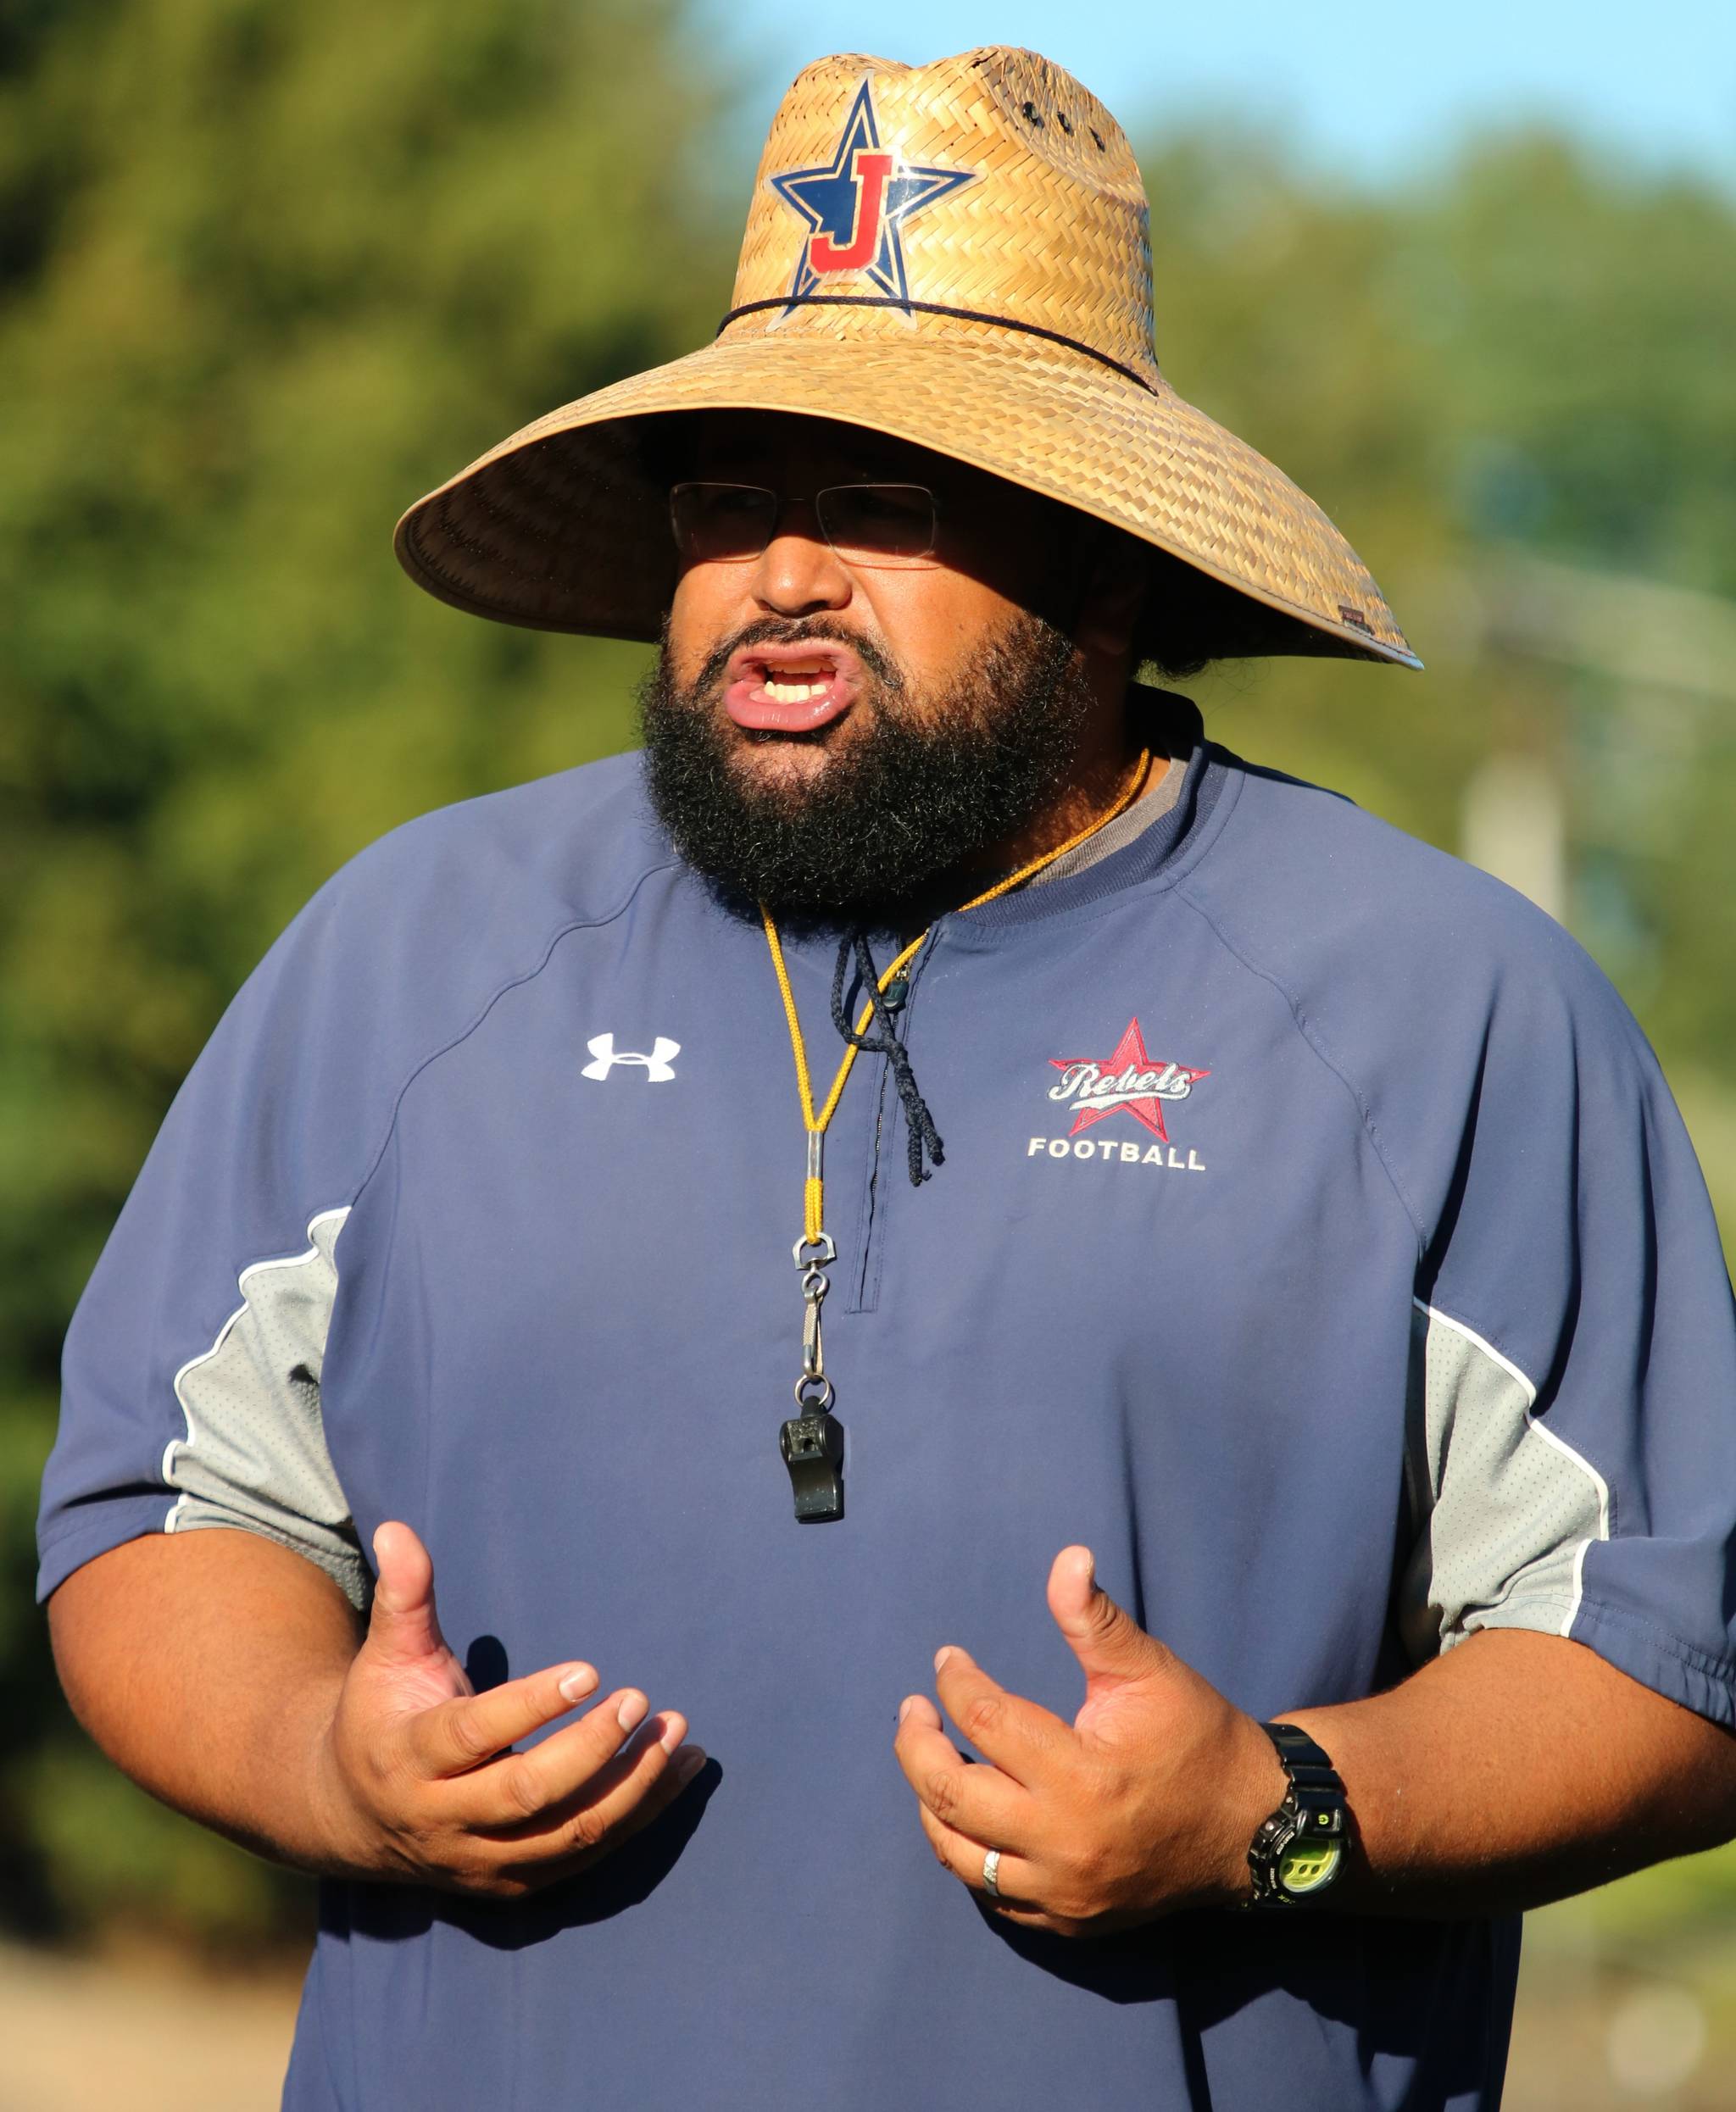 Juanita High head coach Lele Te’o encourages his players during a recent practice. Andy Nystrom, Kirkland Reporter